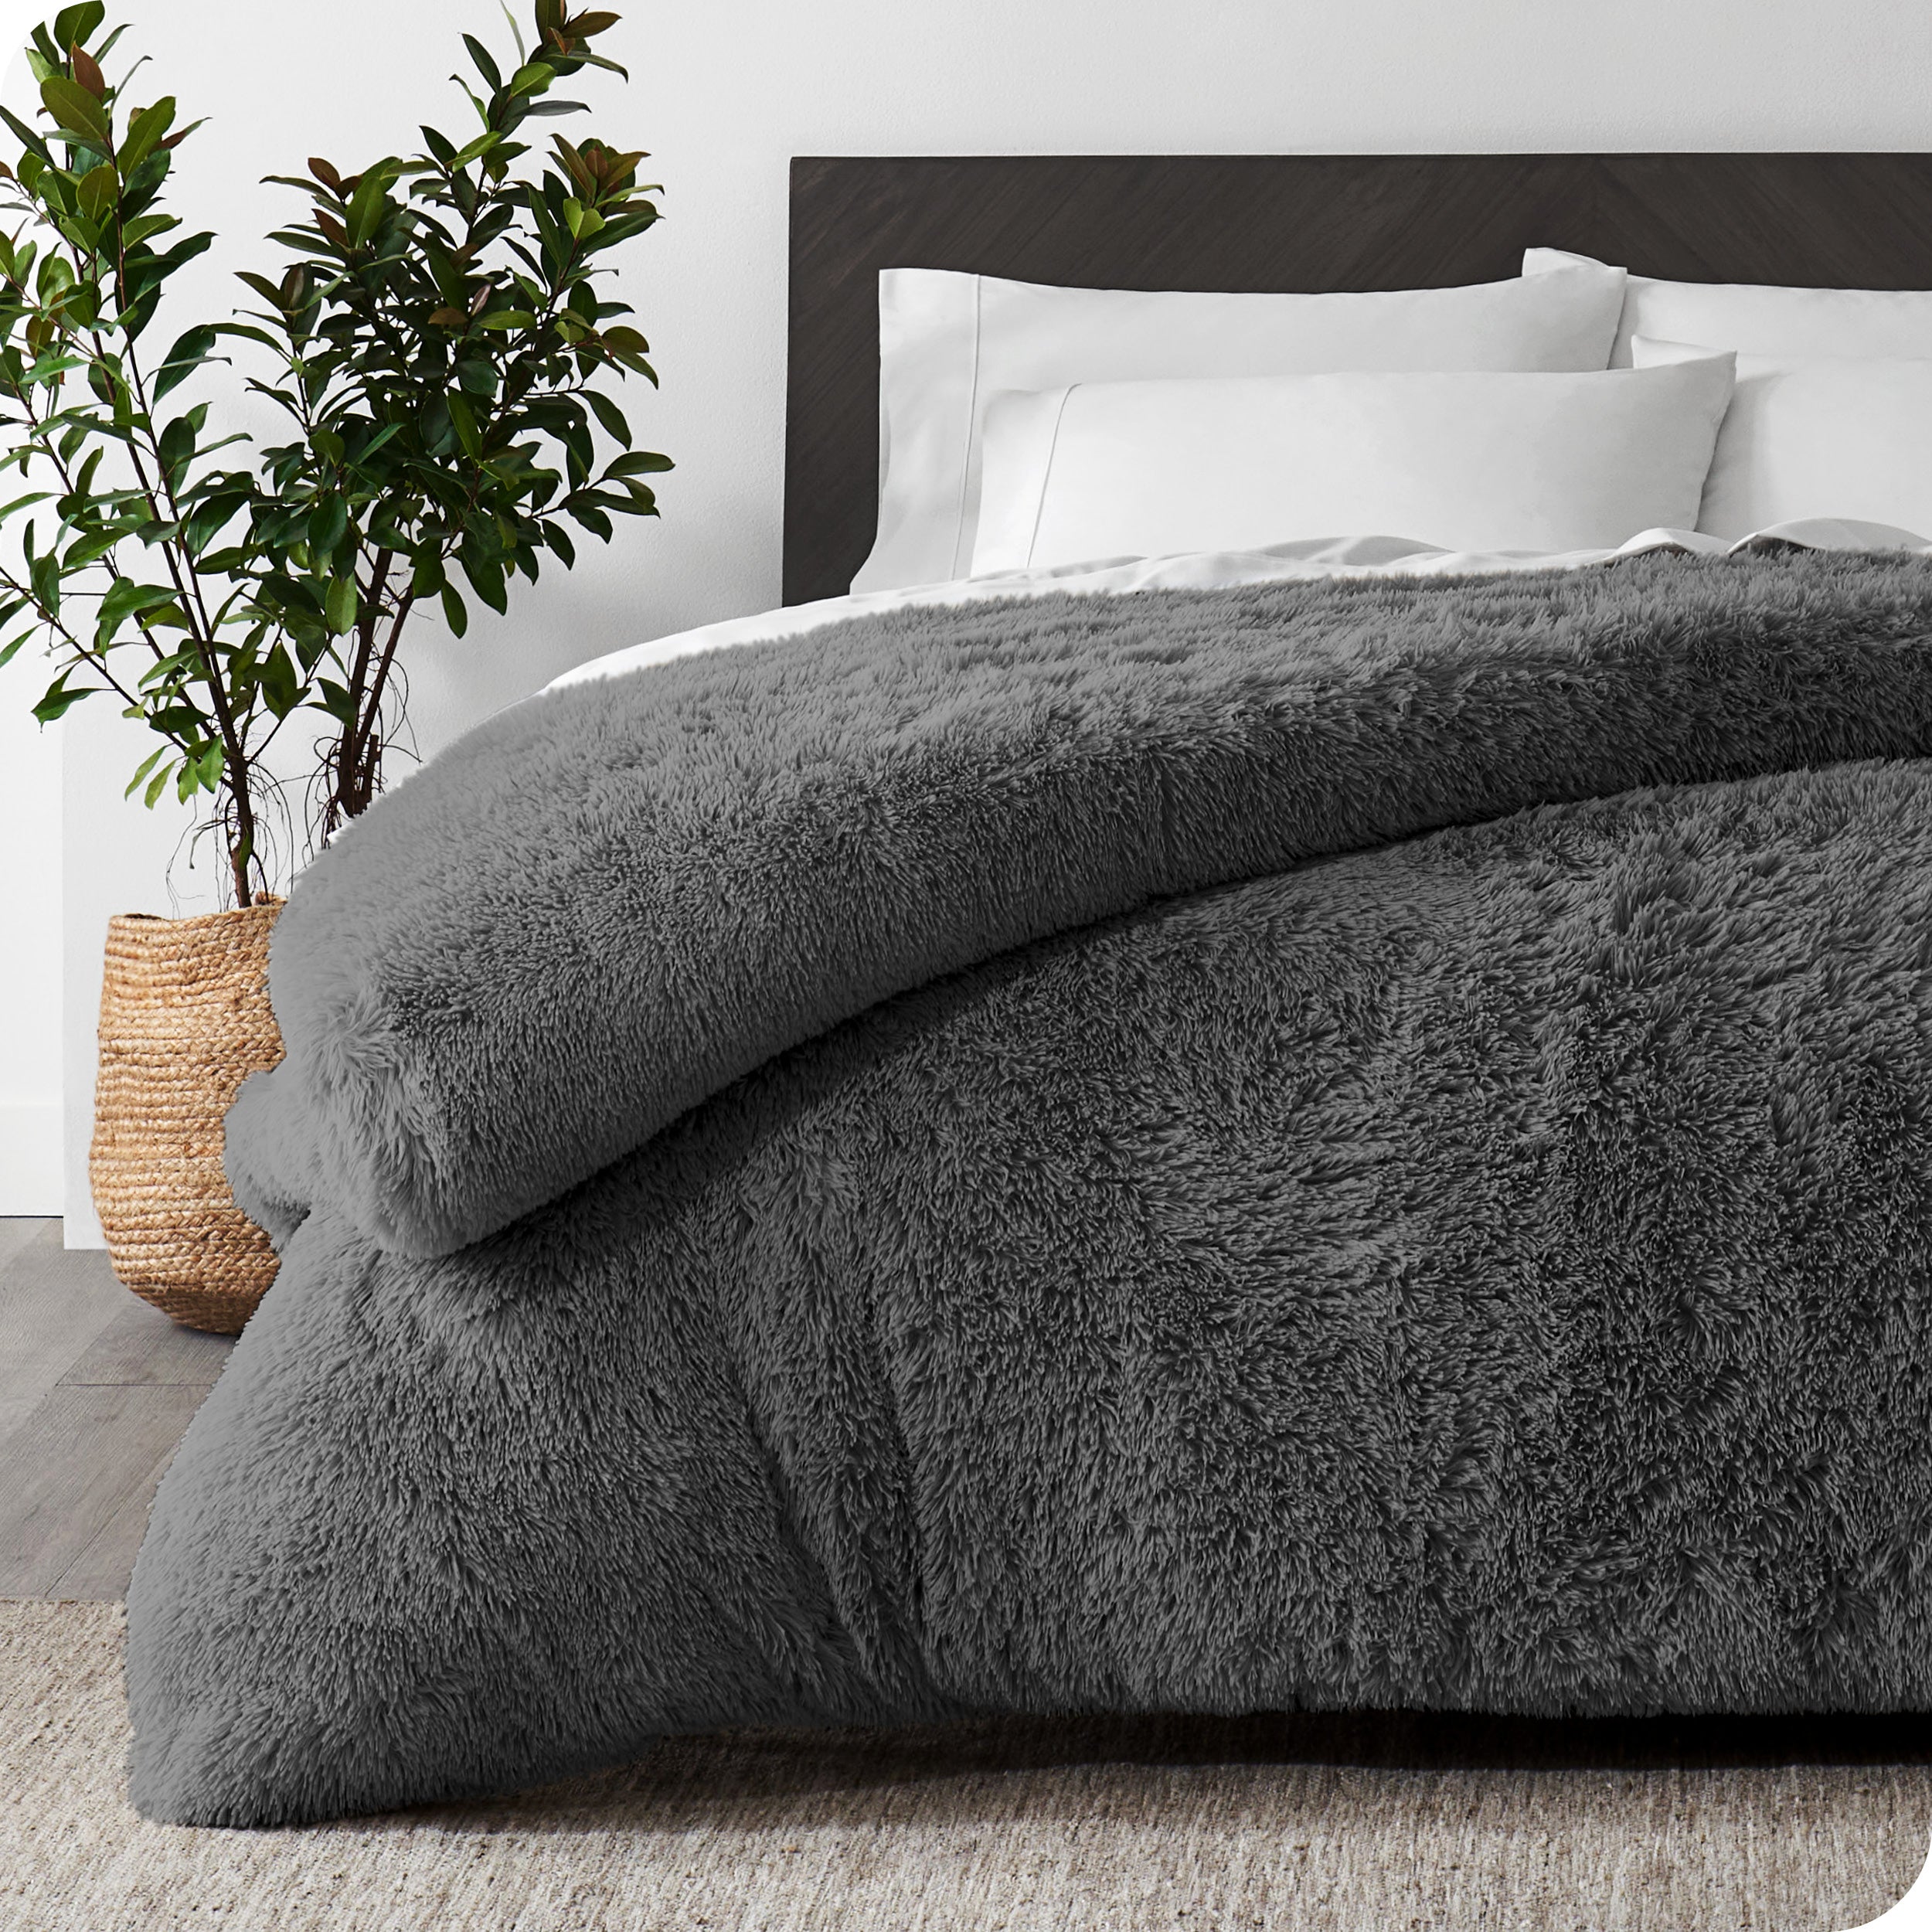 A grey shaggy duvet cover on a bed with white sheets and pillowcases. A large plant is next to the bed.